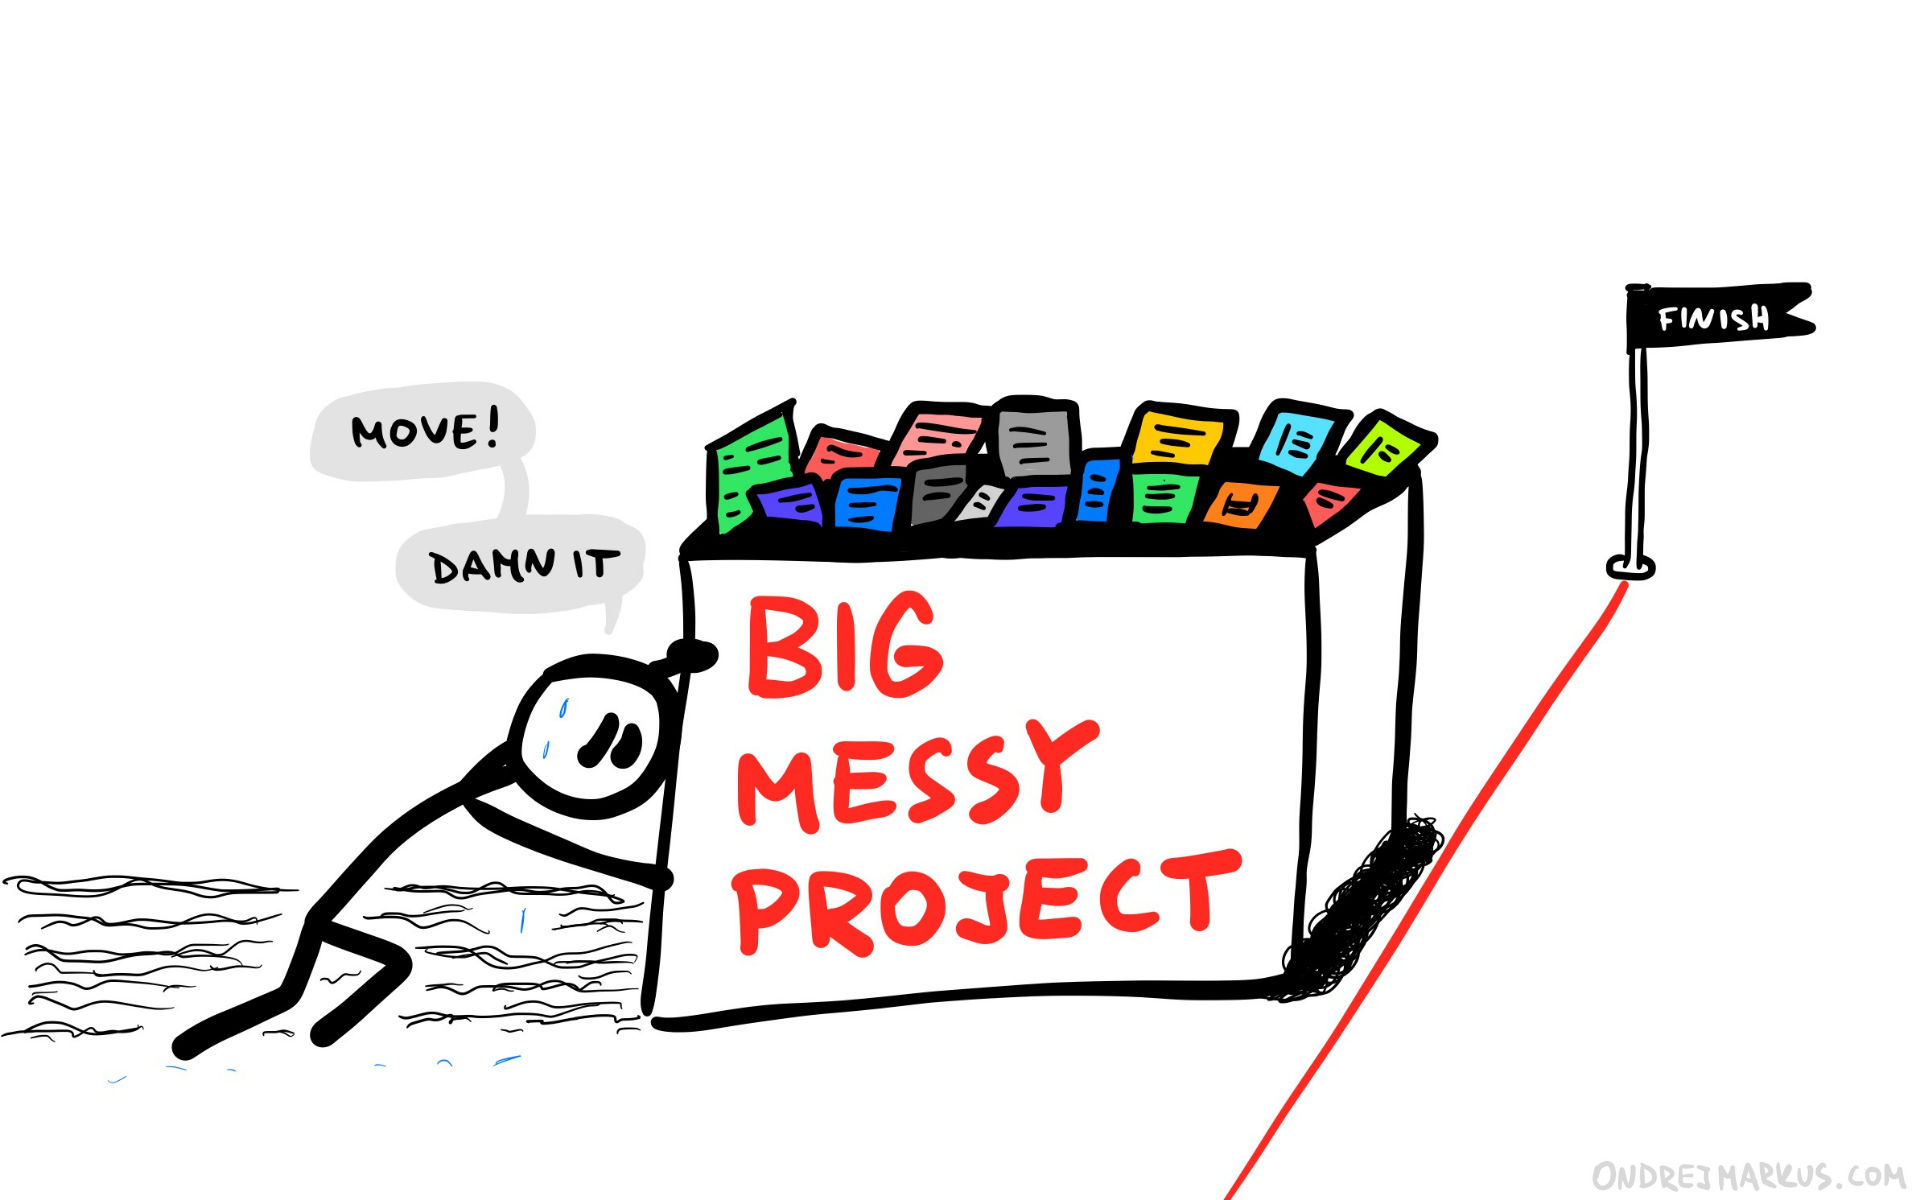 Big messy projects